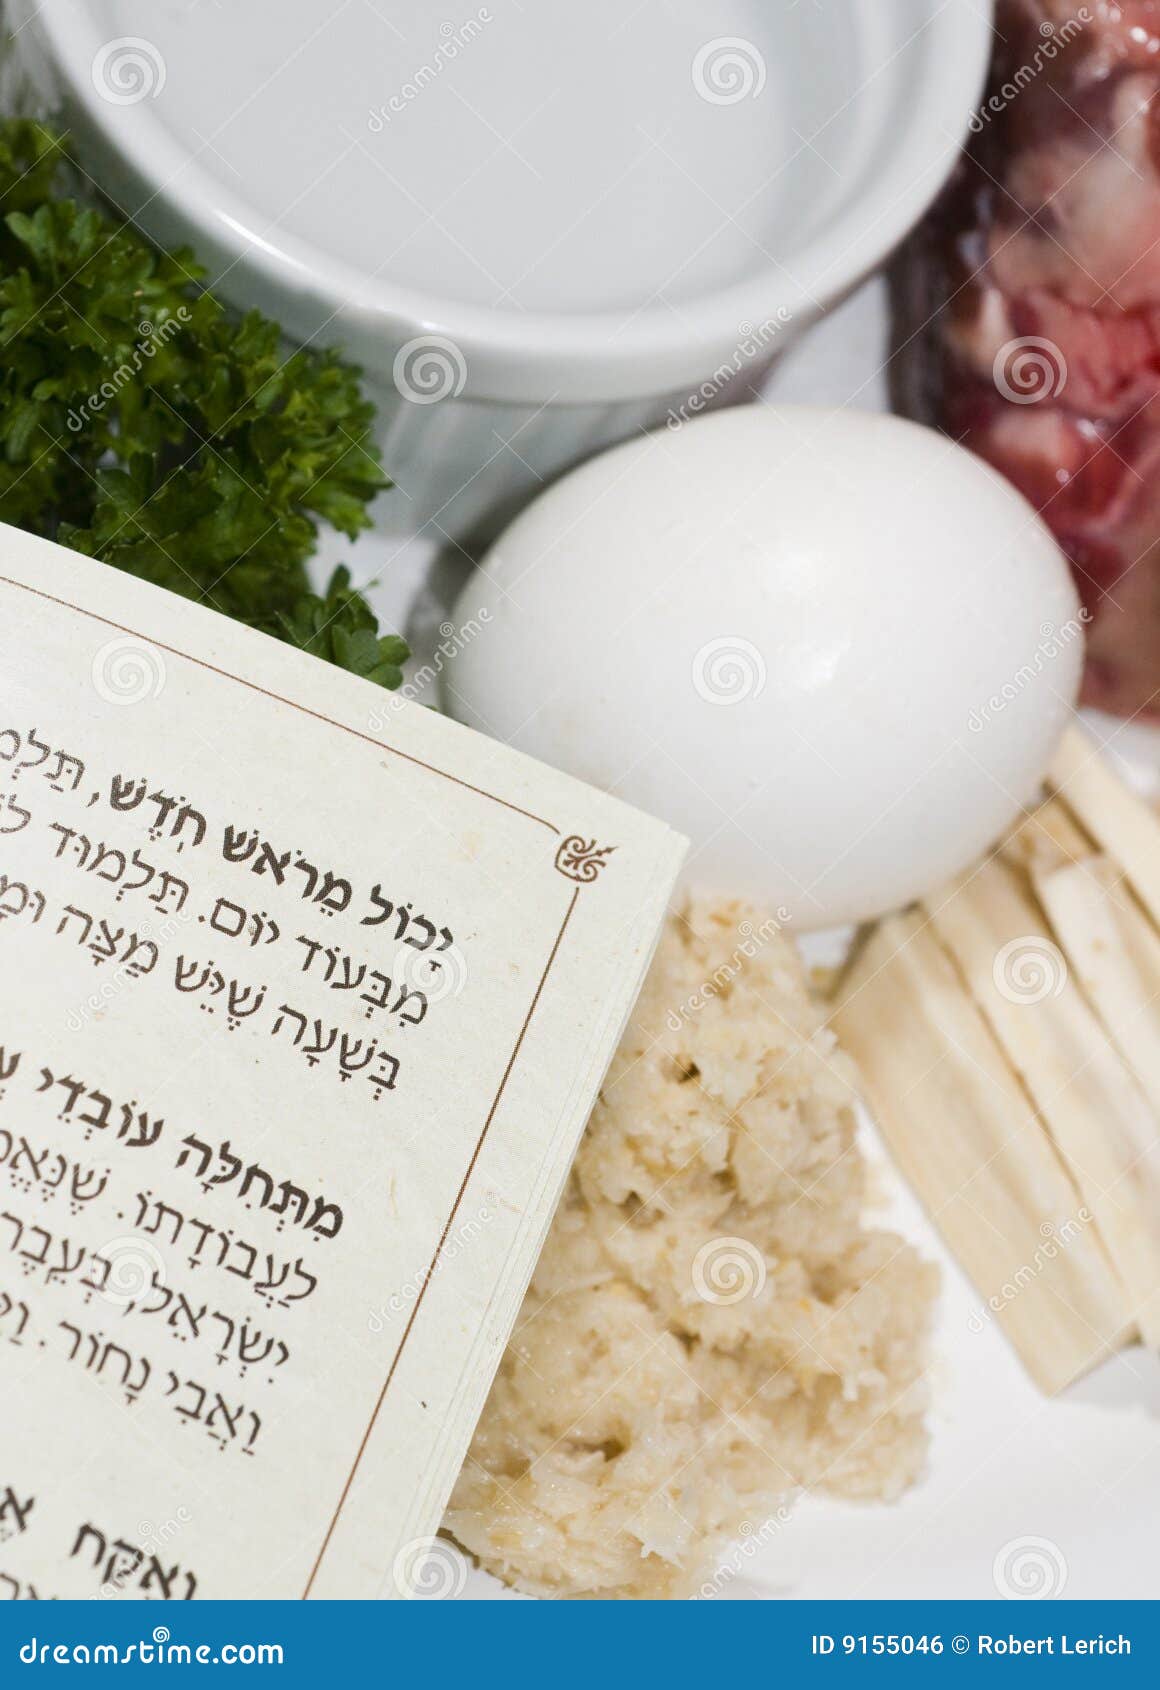 ic passover seder plate